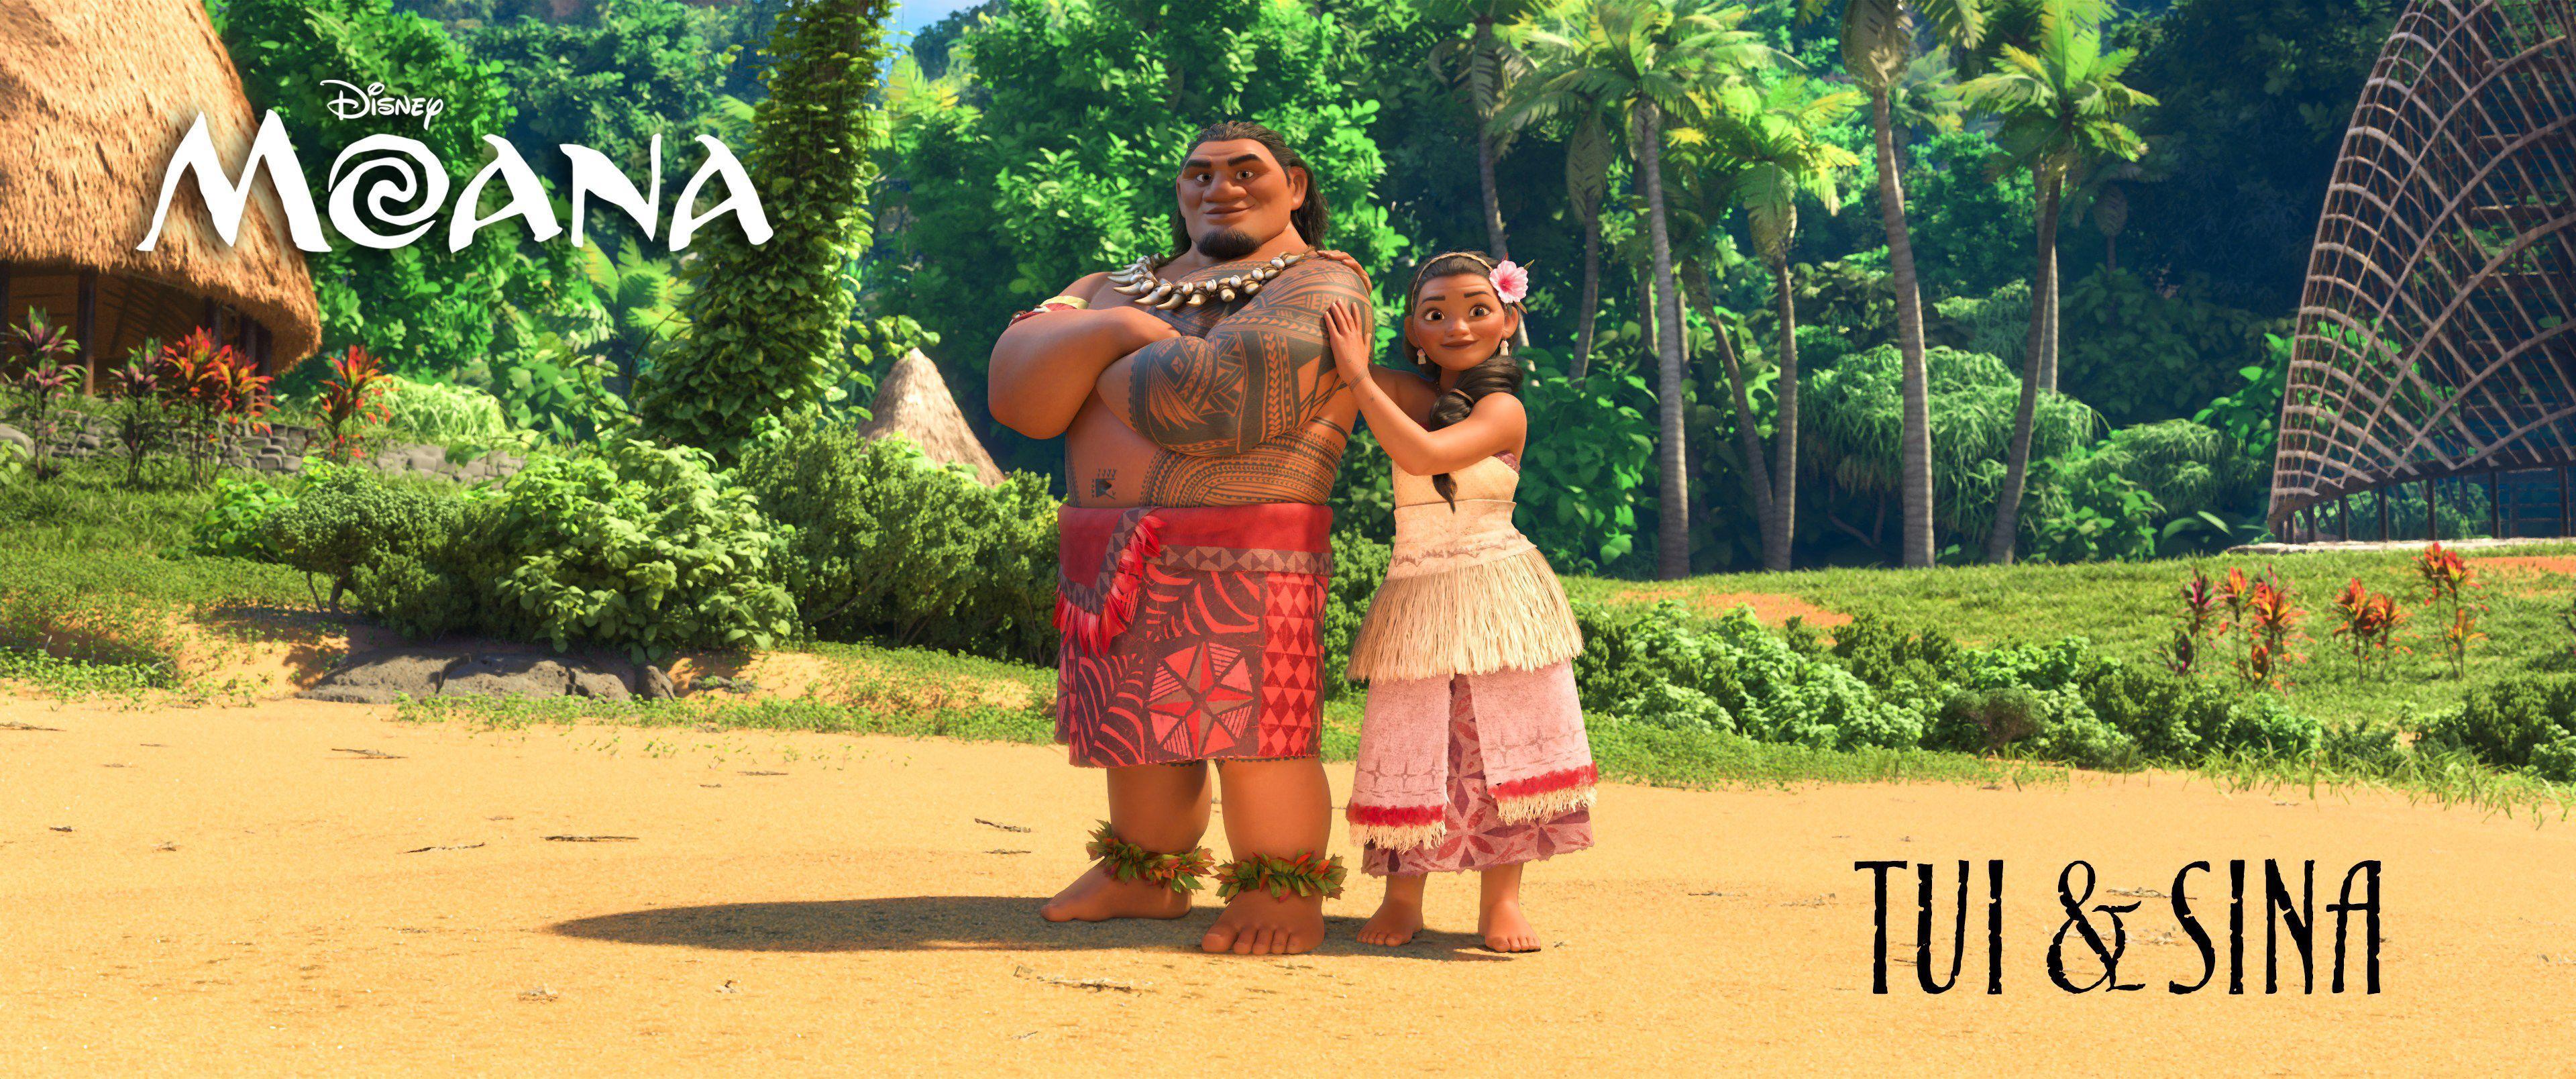 Moana Cast and Characters Revealed in New Colorful Image